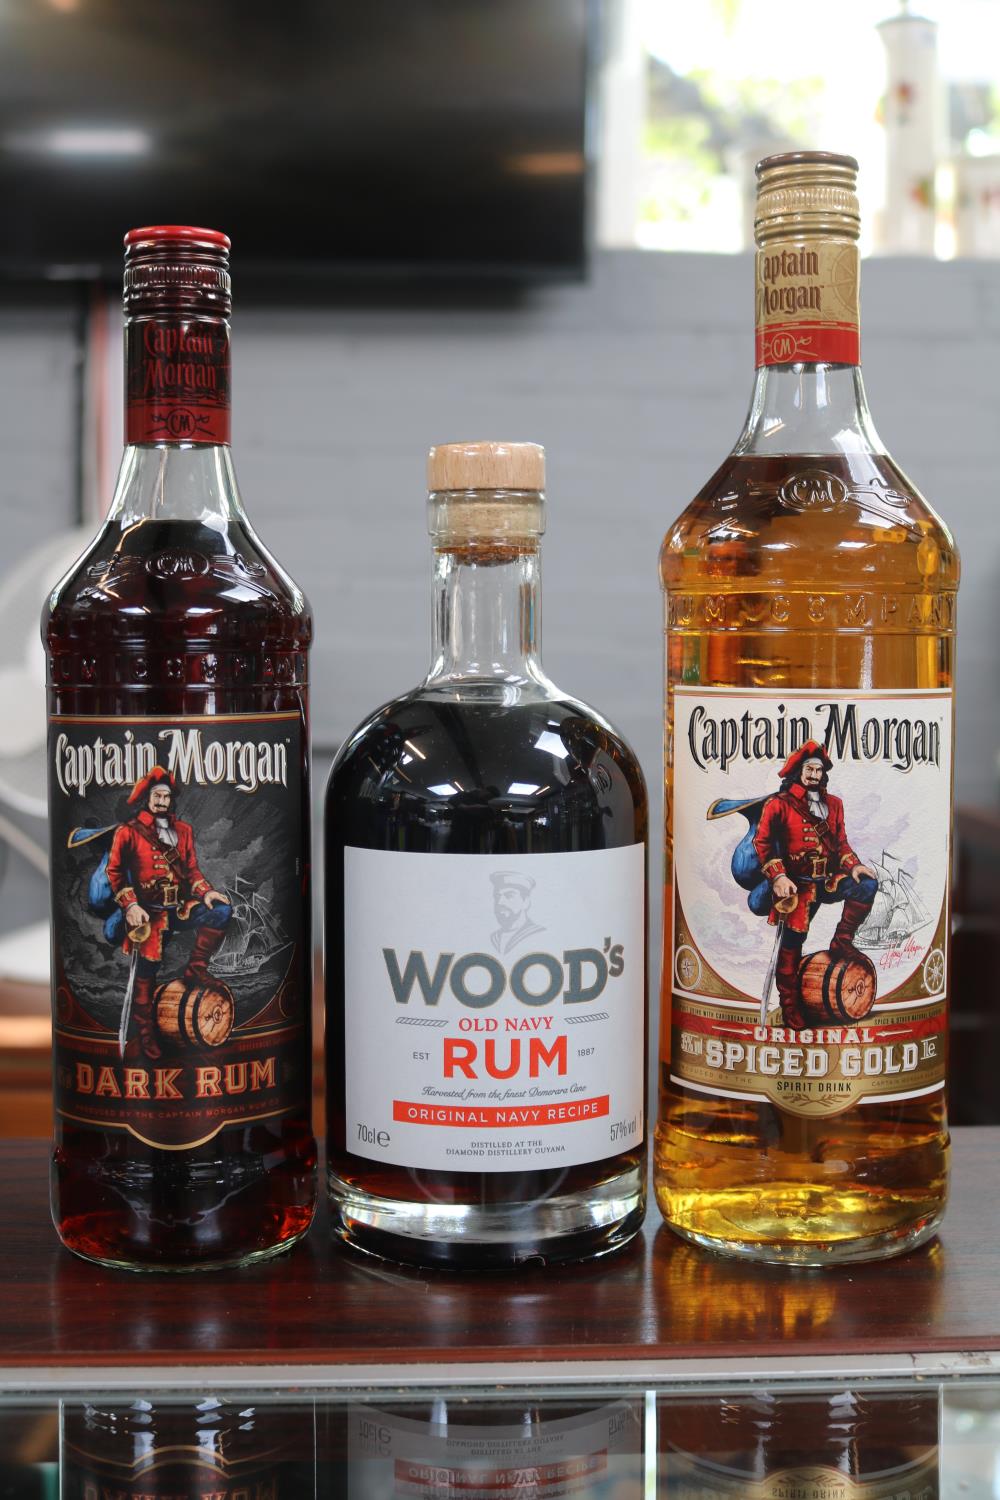 2 Bottles of Captain Morgan's Rum and a 70cl Bottle of Woods Old Navy Rum